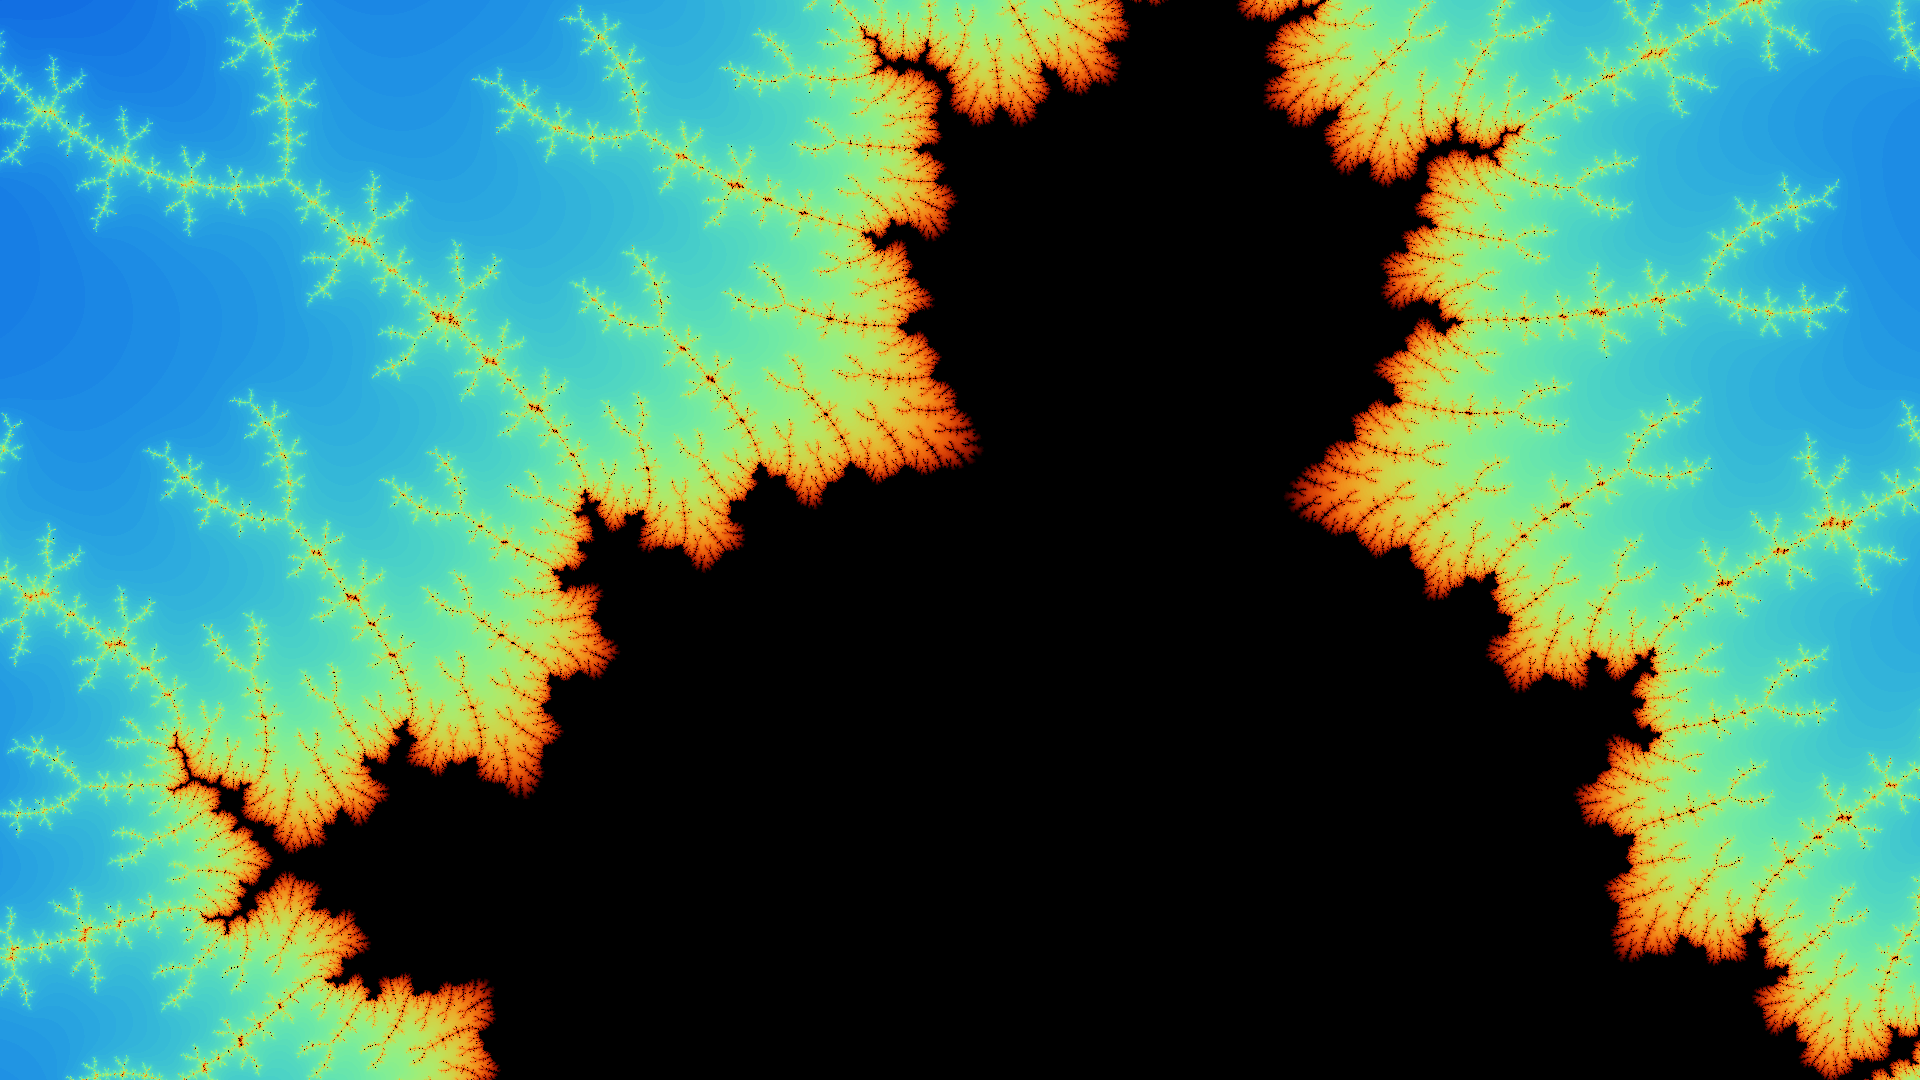 mbt_x_-0.105700_y_-0.925569_zoom_352745.176312_iter_151_inf_54.000000_cmode_2_.png